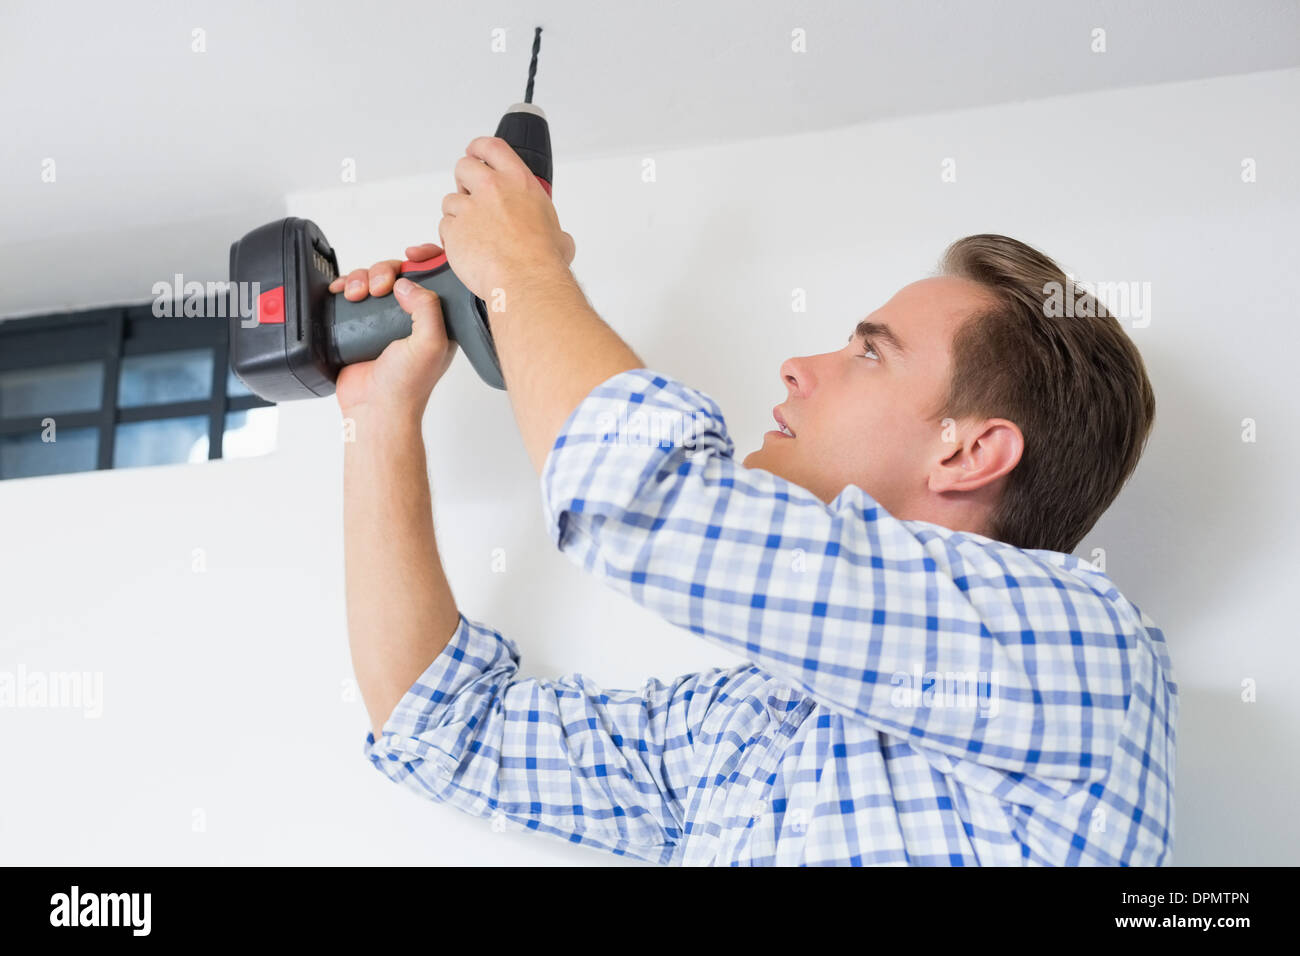 Handyman using a cordless drill to the ceiling Stock Photo